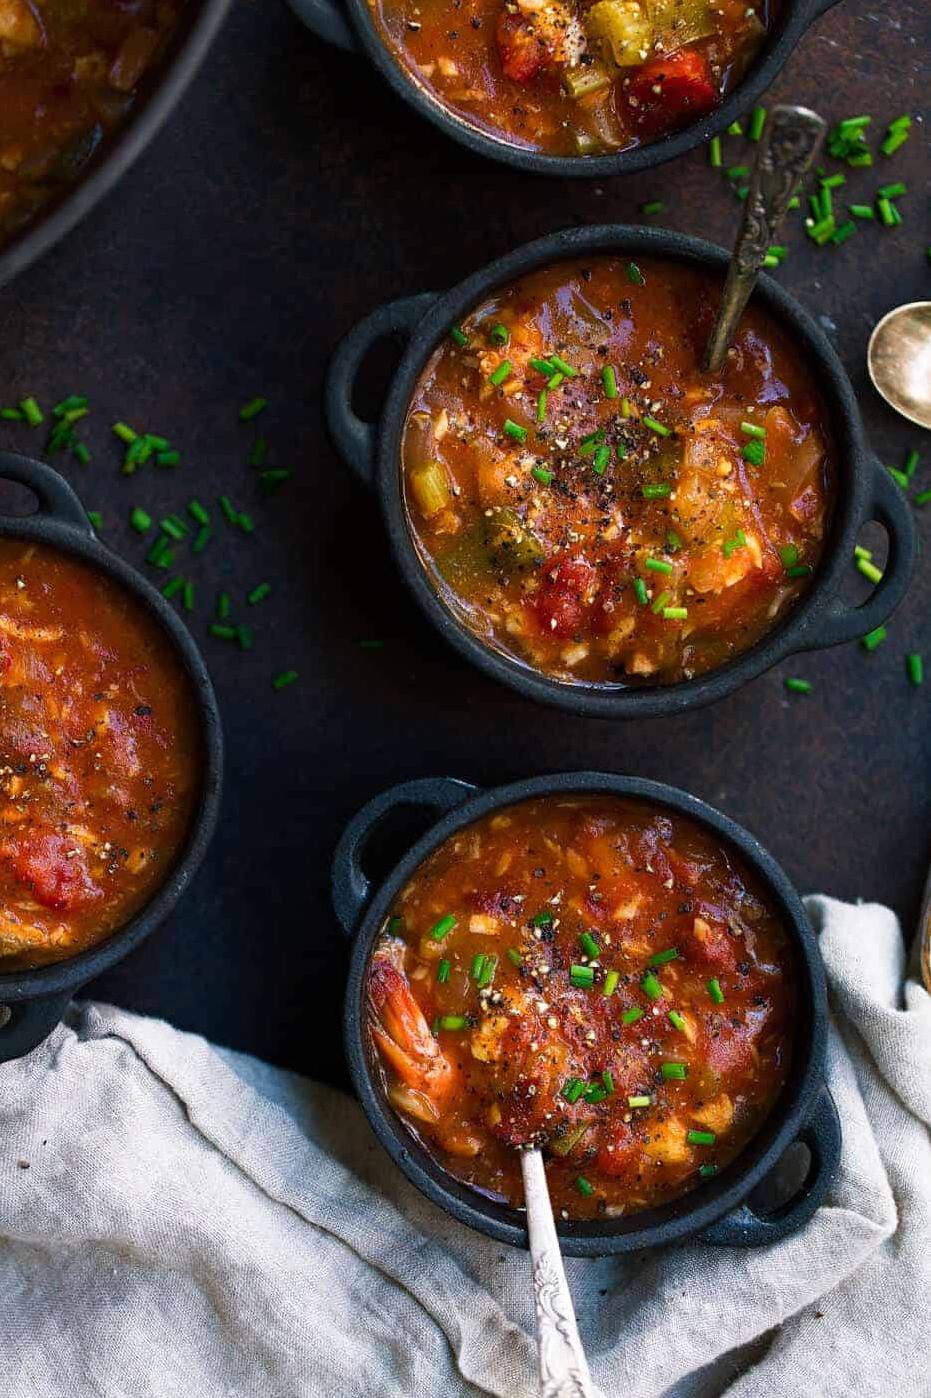  Who said gluten-free can't be delicious? This gumbo is here to prove them wrong.